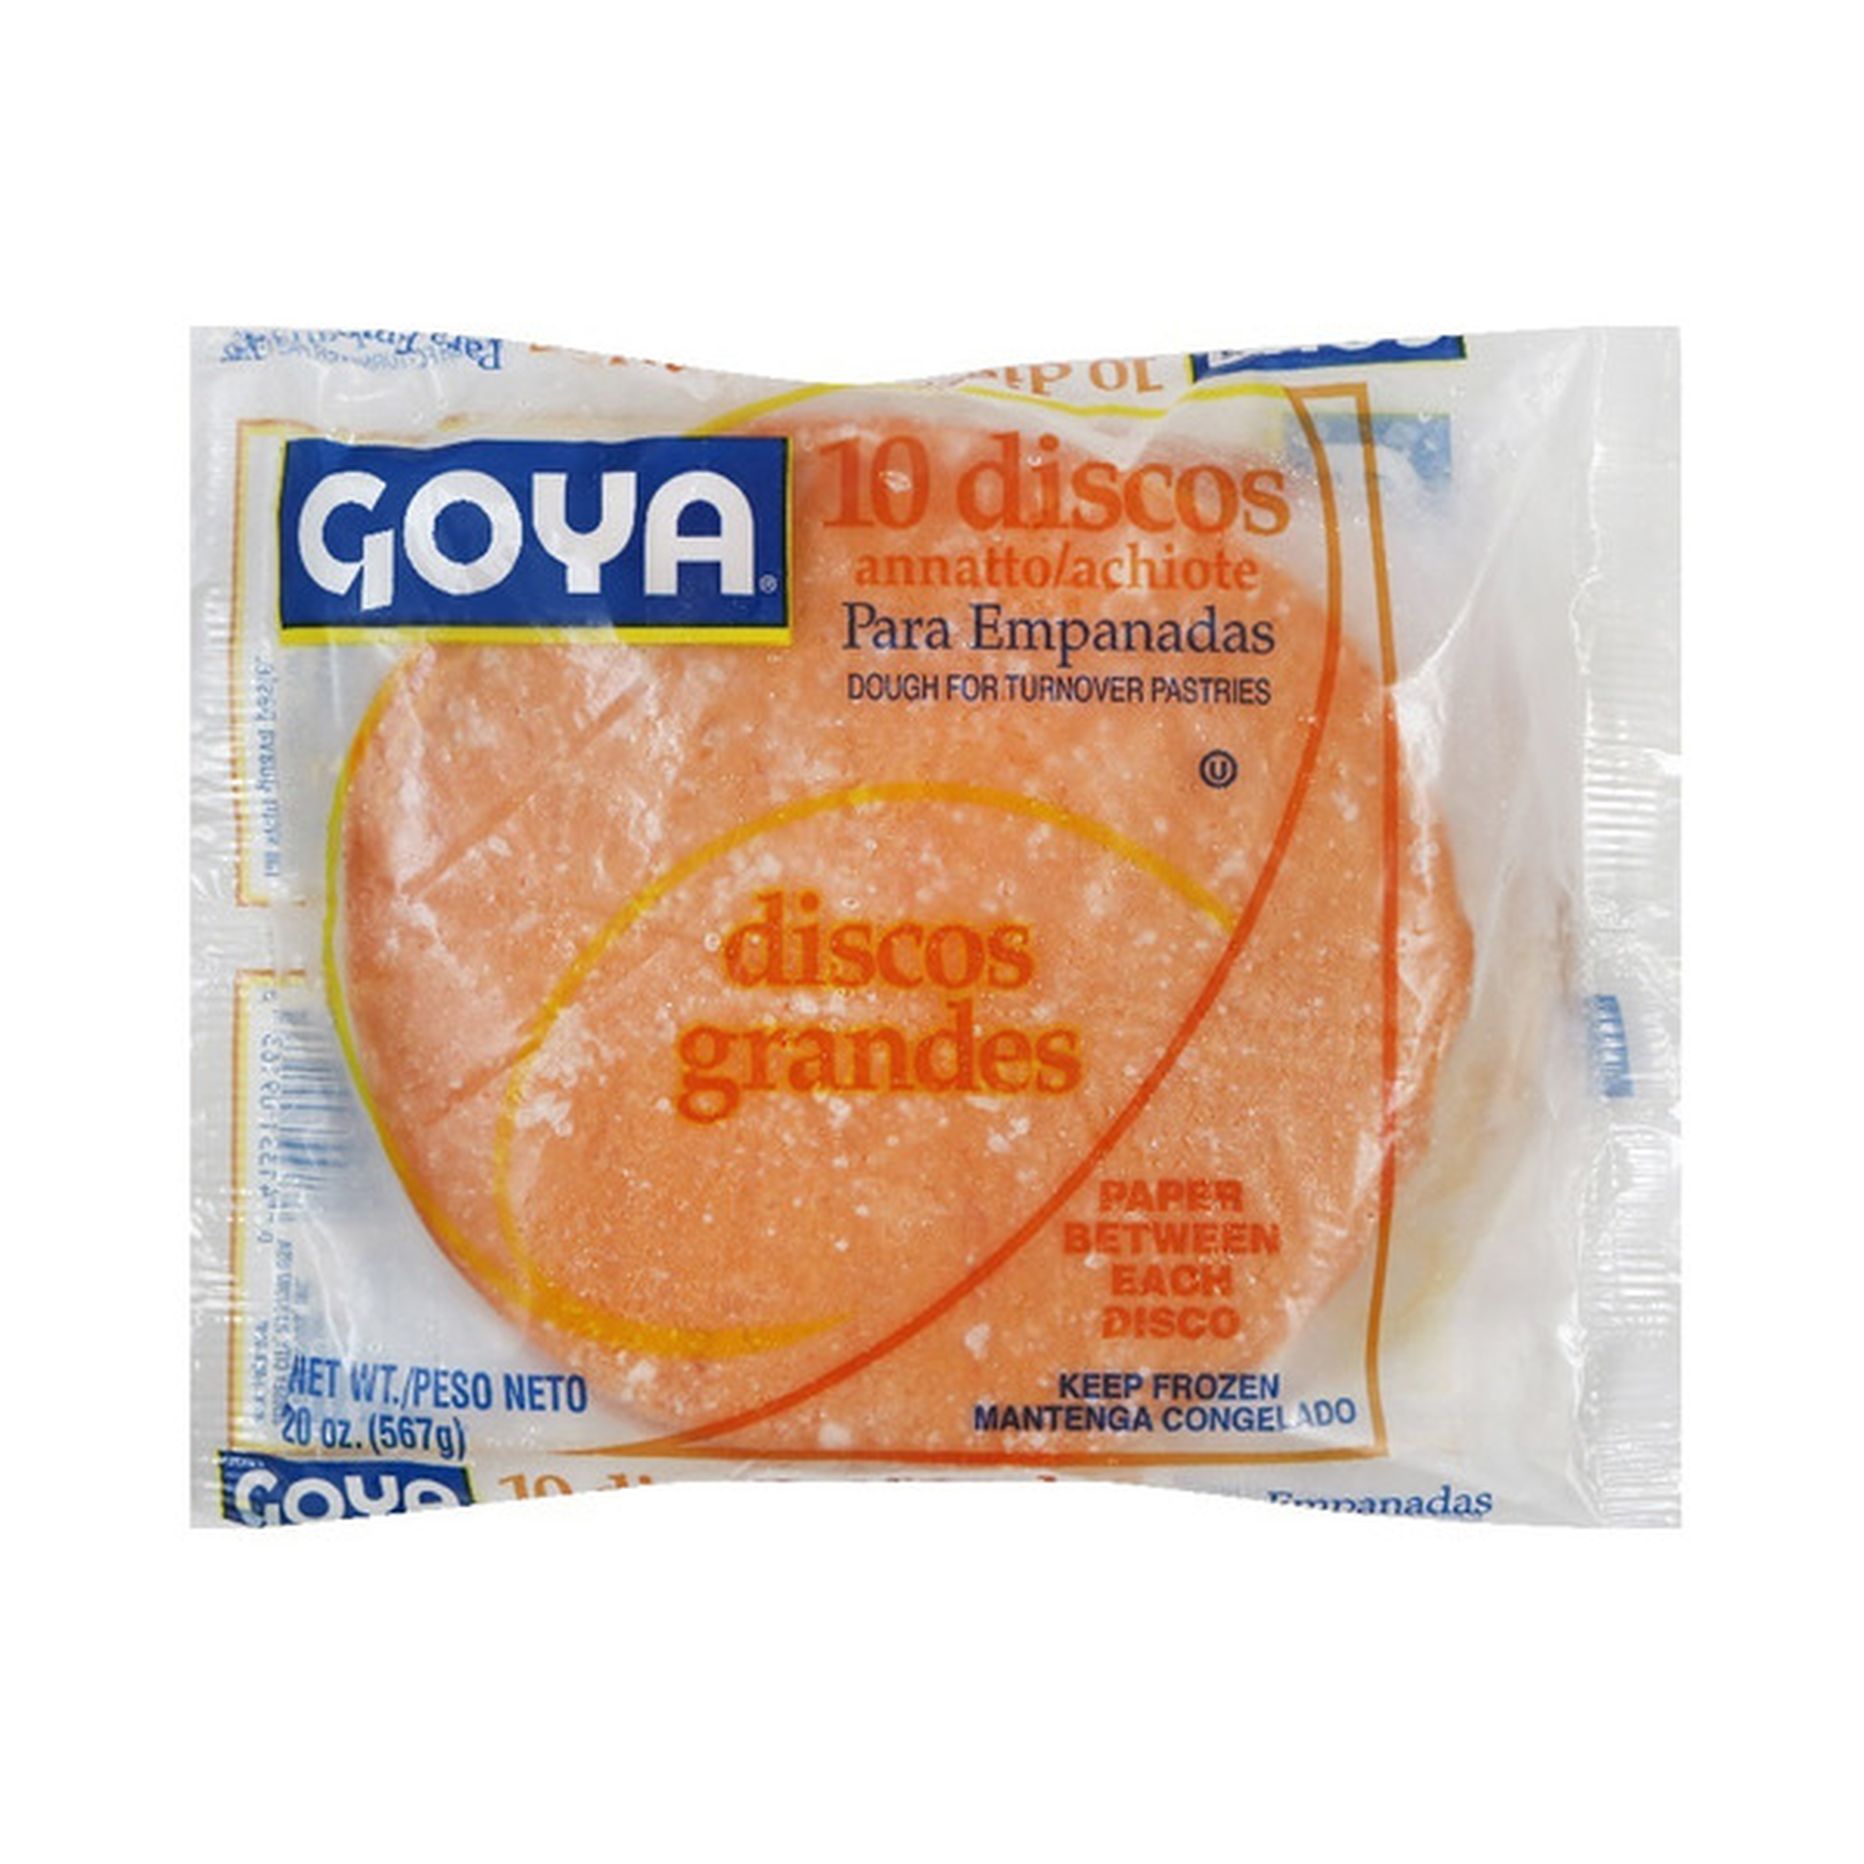 Goya Empanada Dough Discs For Turnover Pastries With Annatto 20 Oz Delivery Or Pickup Near Me 8317